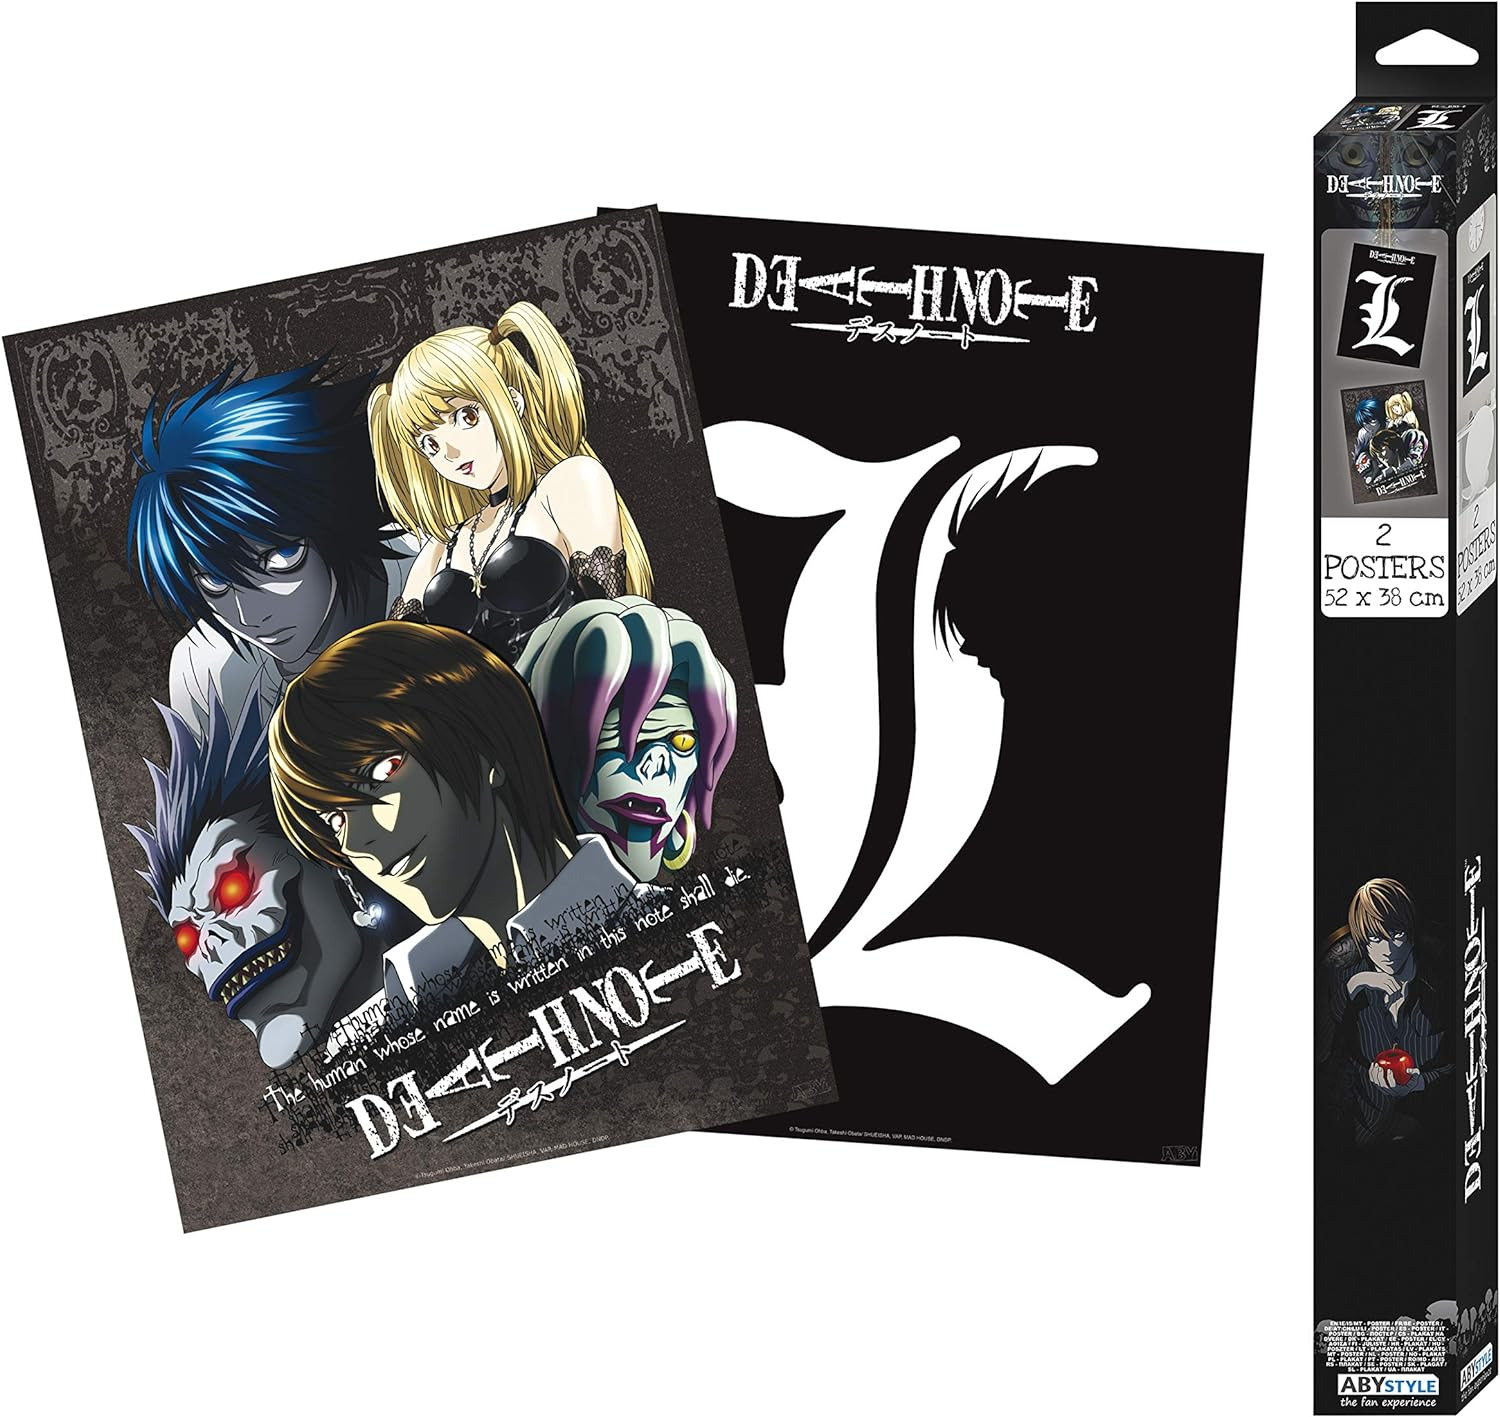 Death Note Boxed Poster Set 15 X 20.5 Includes 2 Unframed Mini Posters Featuring